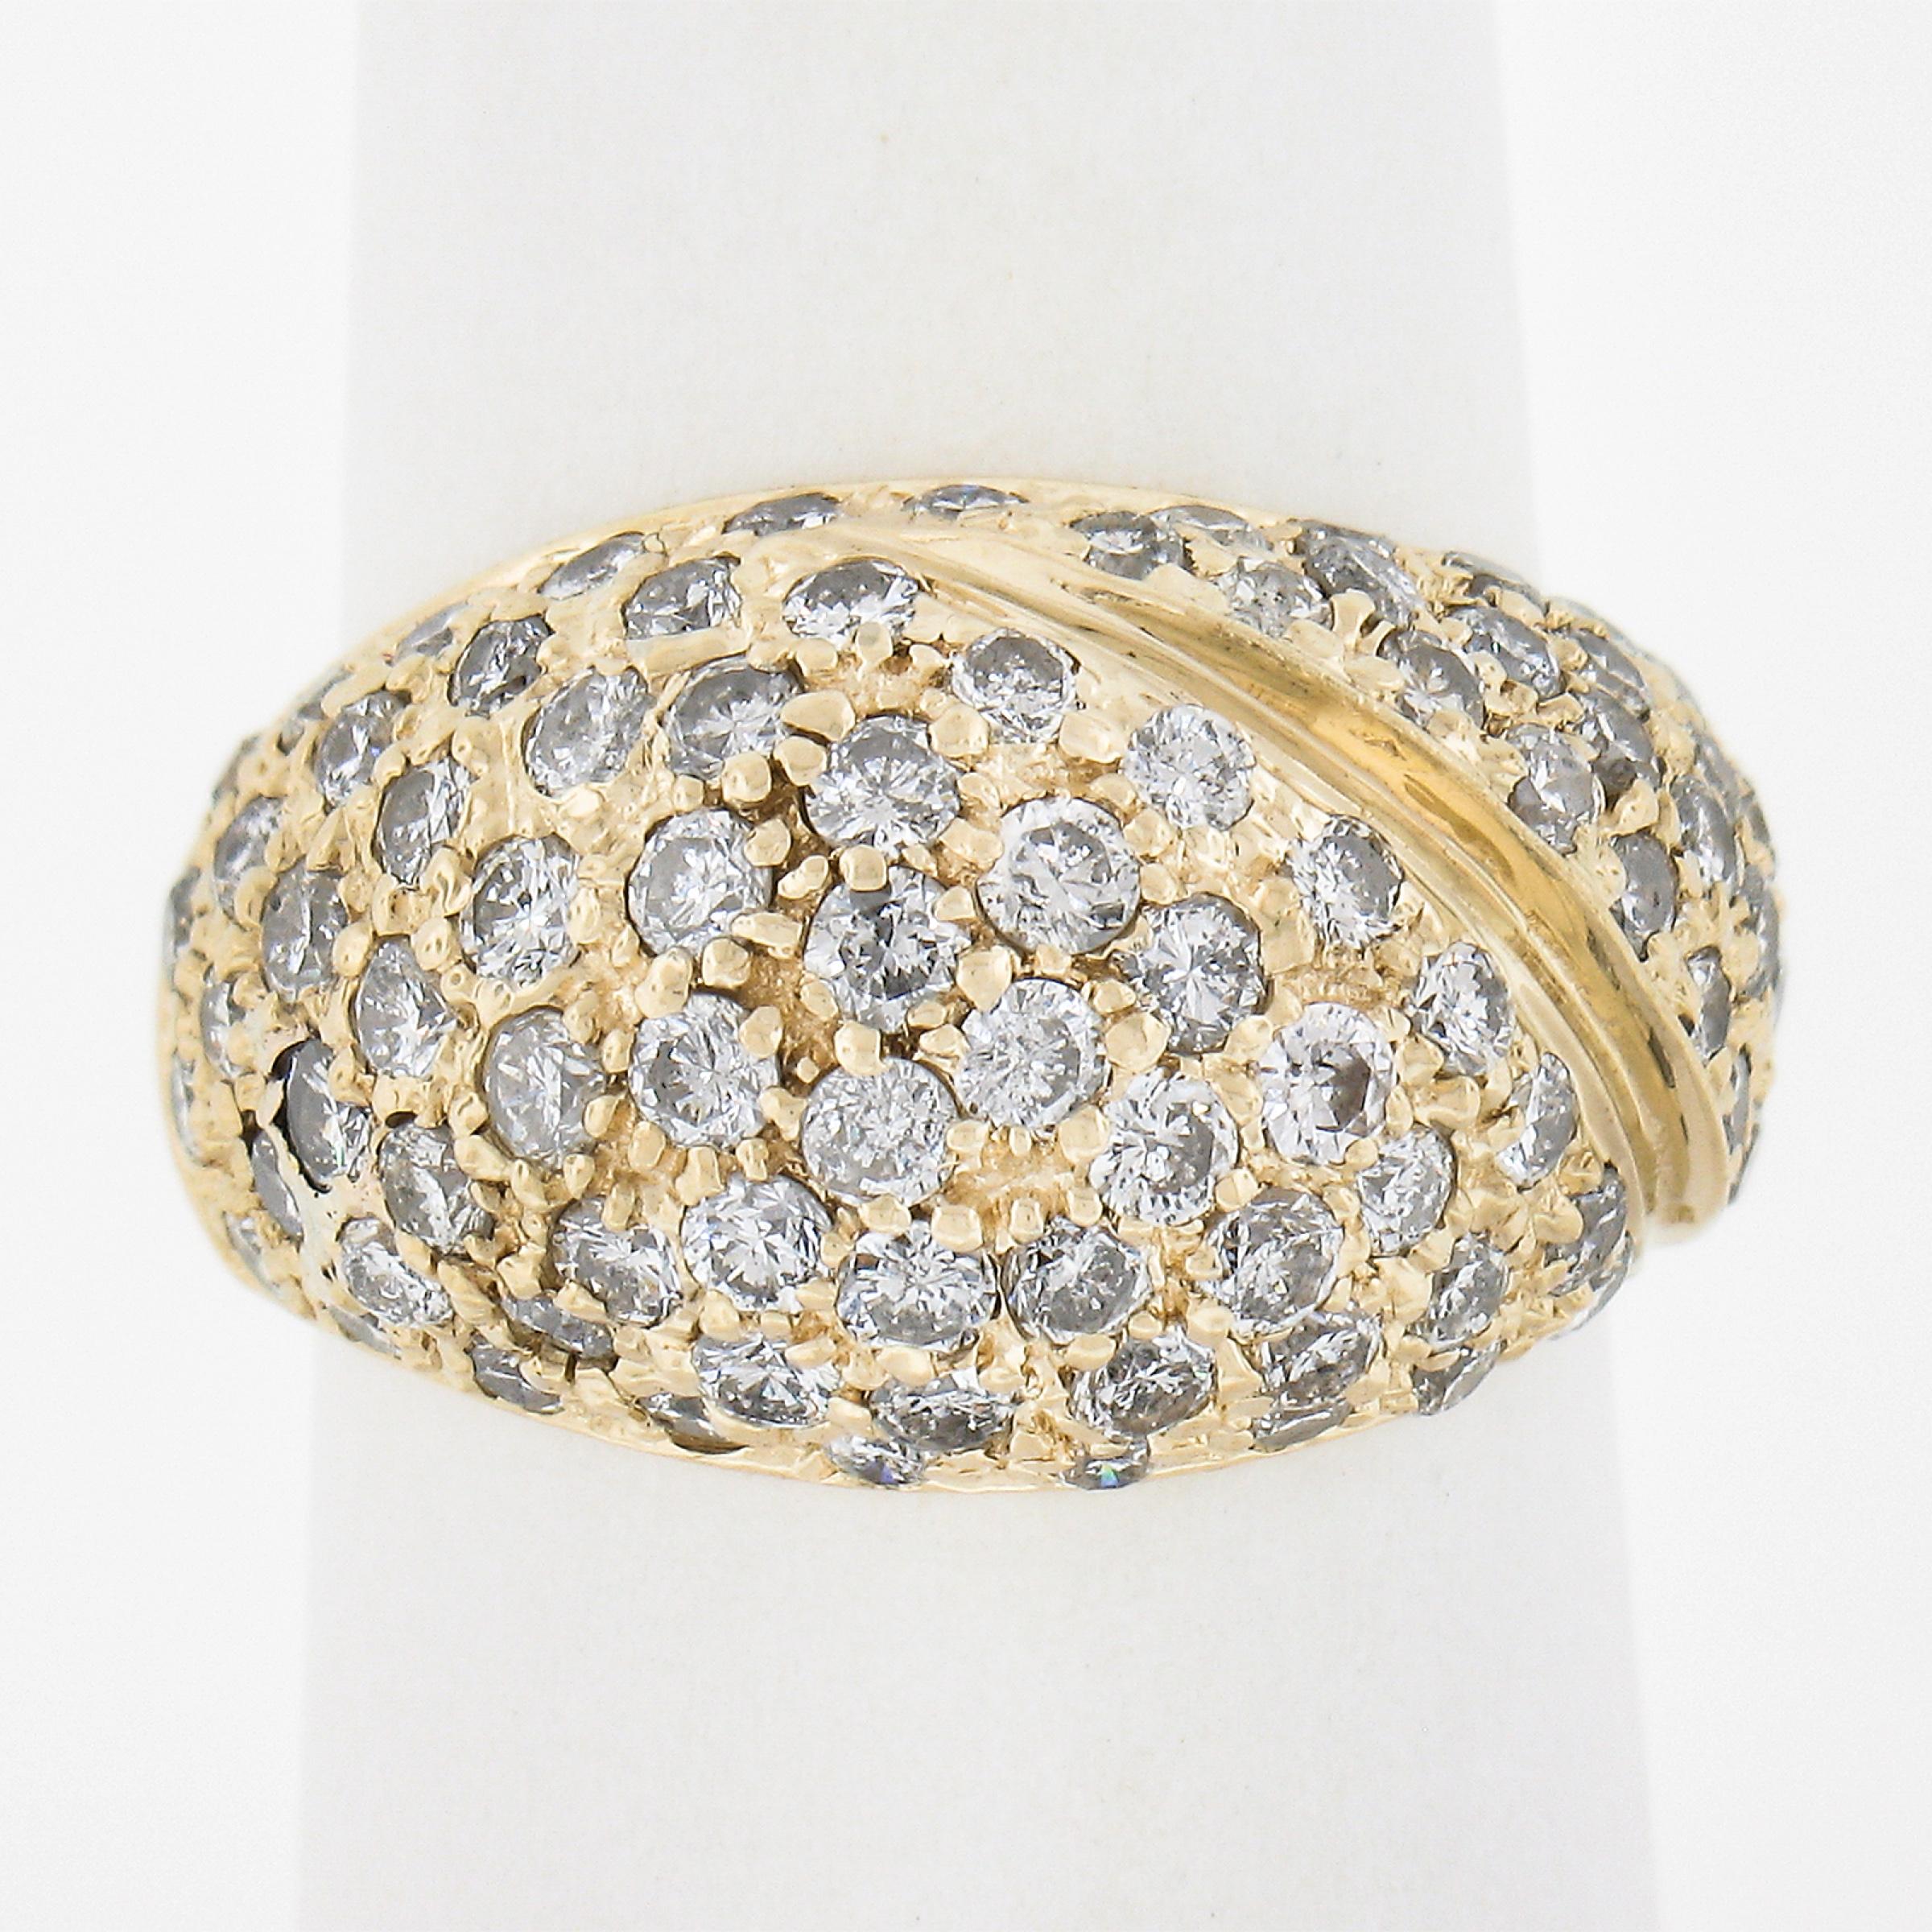 --Stone(s):--
(90) Natural Genuine Diamonds - Round Brilliant Cut - Pave Set - G/H Color - VS2-SI2 Clarity
Total Carat Weight:	2 (approx.)

Material: Solid 14k Yellow Gold
Weight: 7 Grams
Ring Size: 6.5 (Fitted on a finger. we can custom size this